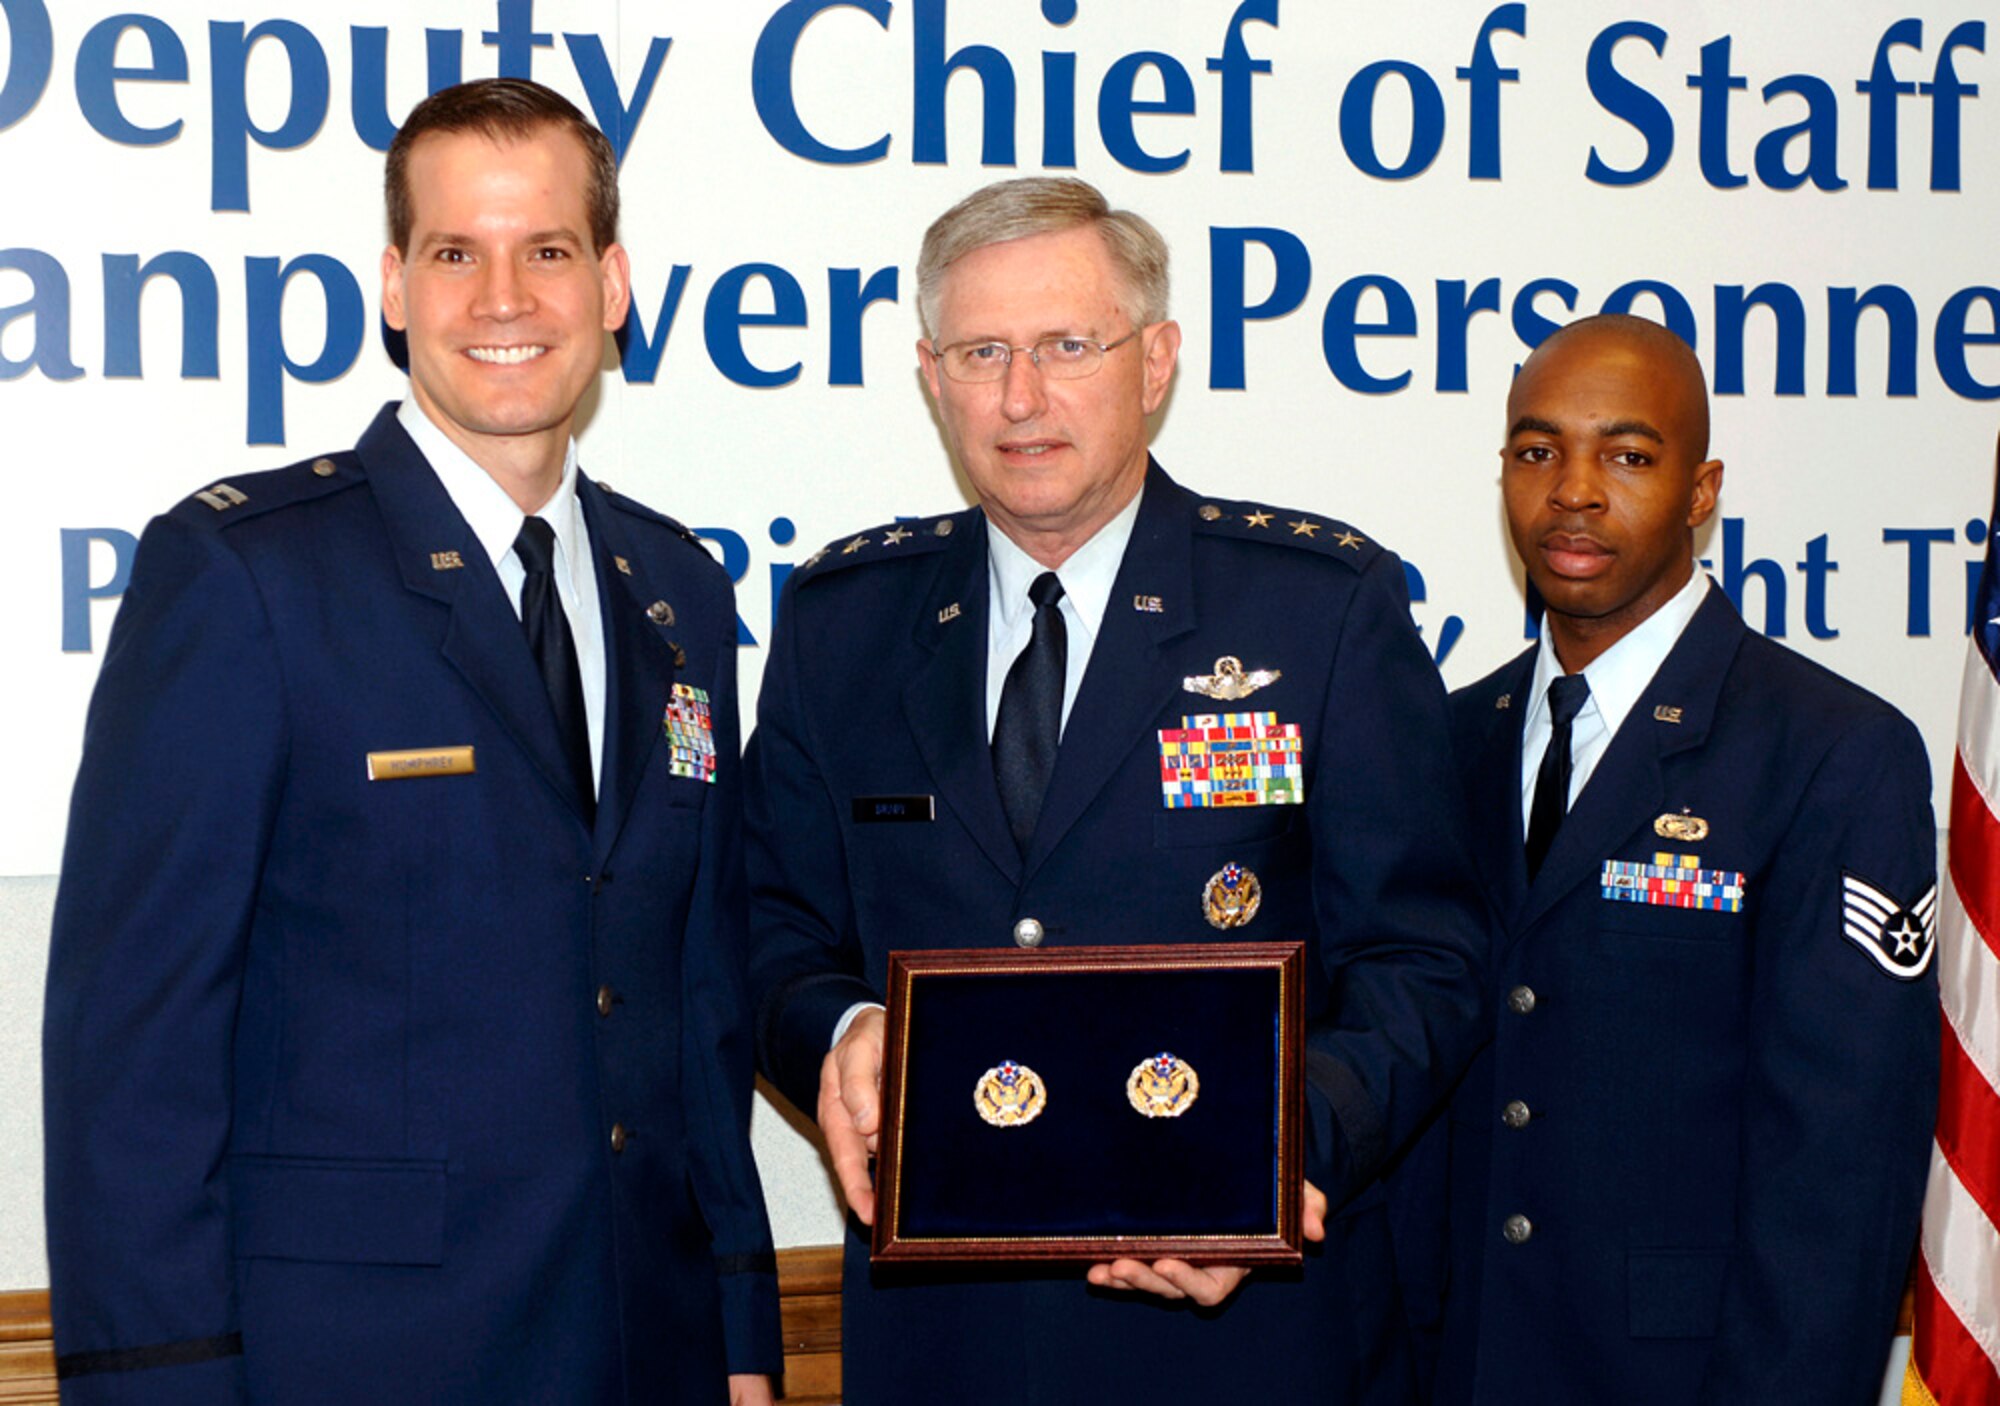 Lt. Gen. Roger Brady, deputy chief of staff for manpower and personnel, prepares to present a new Headquarters Air Force badge to Capt. Brian Humphrey and to Staff Sgt. Chris Kennerly during a ceremony marking the official release of the badge on Friday, May 19, 2006, in the Pentagon.  Airmen assigned to the Pentagon will have the option to wear the new badge.  The basis for the badge is Air Force heritage and the design incorporates many elements from the Department of the Air Force Seal.  Air Force Chief of Staff Gen. T. Michael Moseley approved the design and development of the badge in September.  (U.S. Air Force photo/Tech. Sgt. Scott M. Ash)